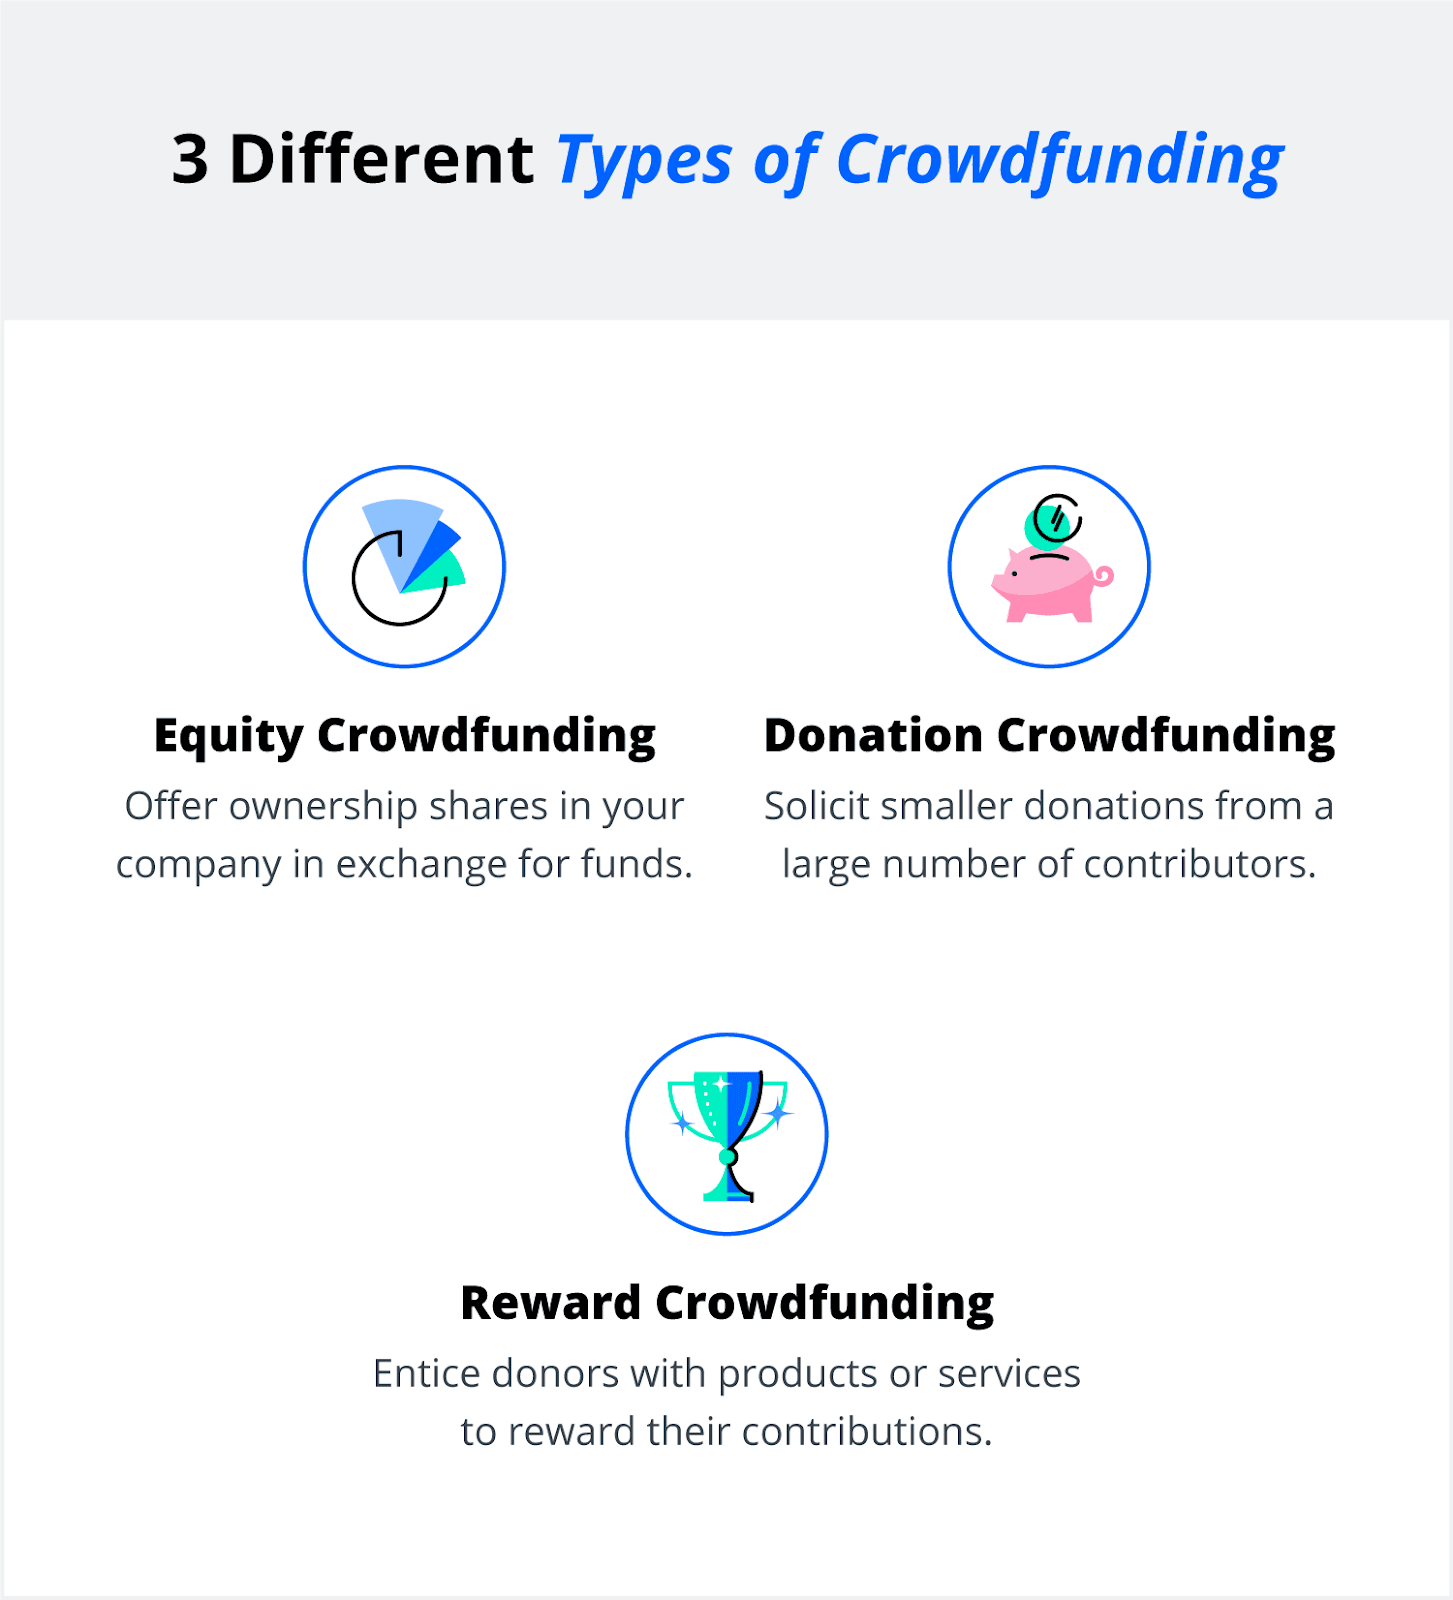 Crowdfunding for Startups: 3 Things to Keep in Mind